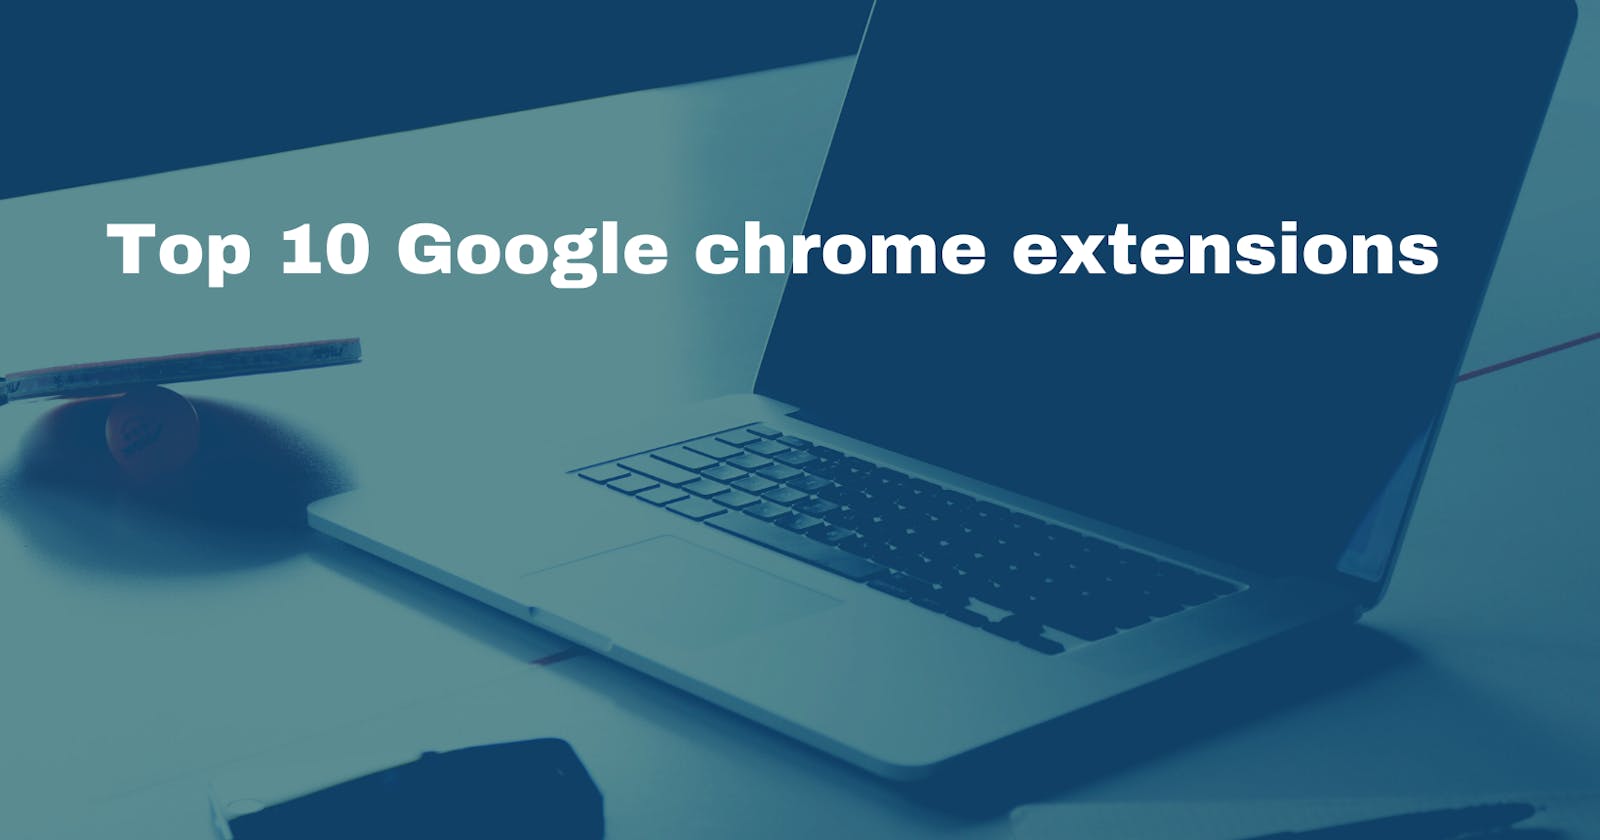 Top 10 Google chrome extensions I use as backend web developer